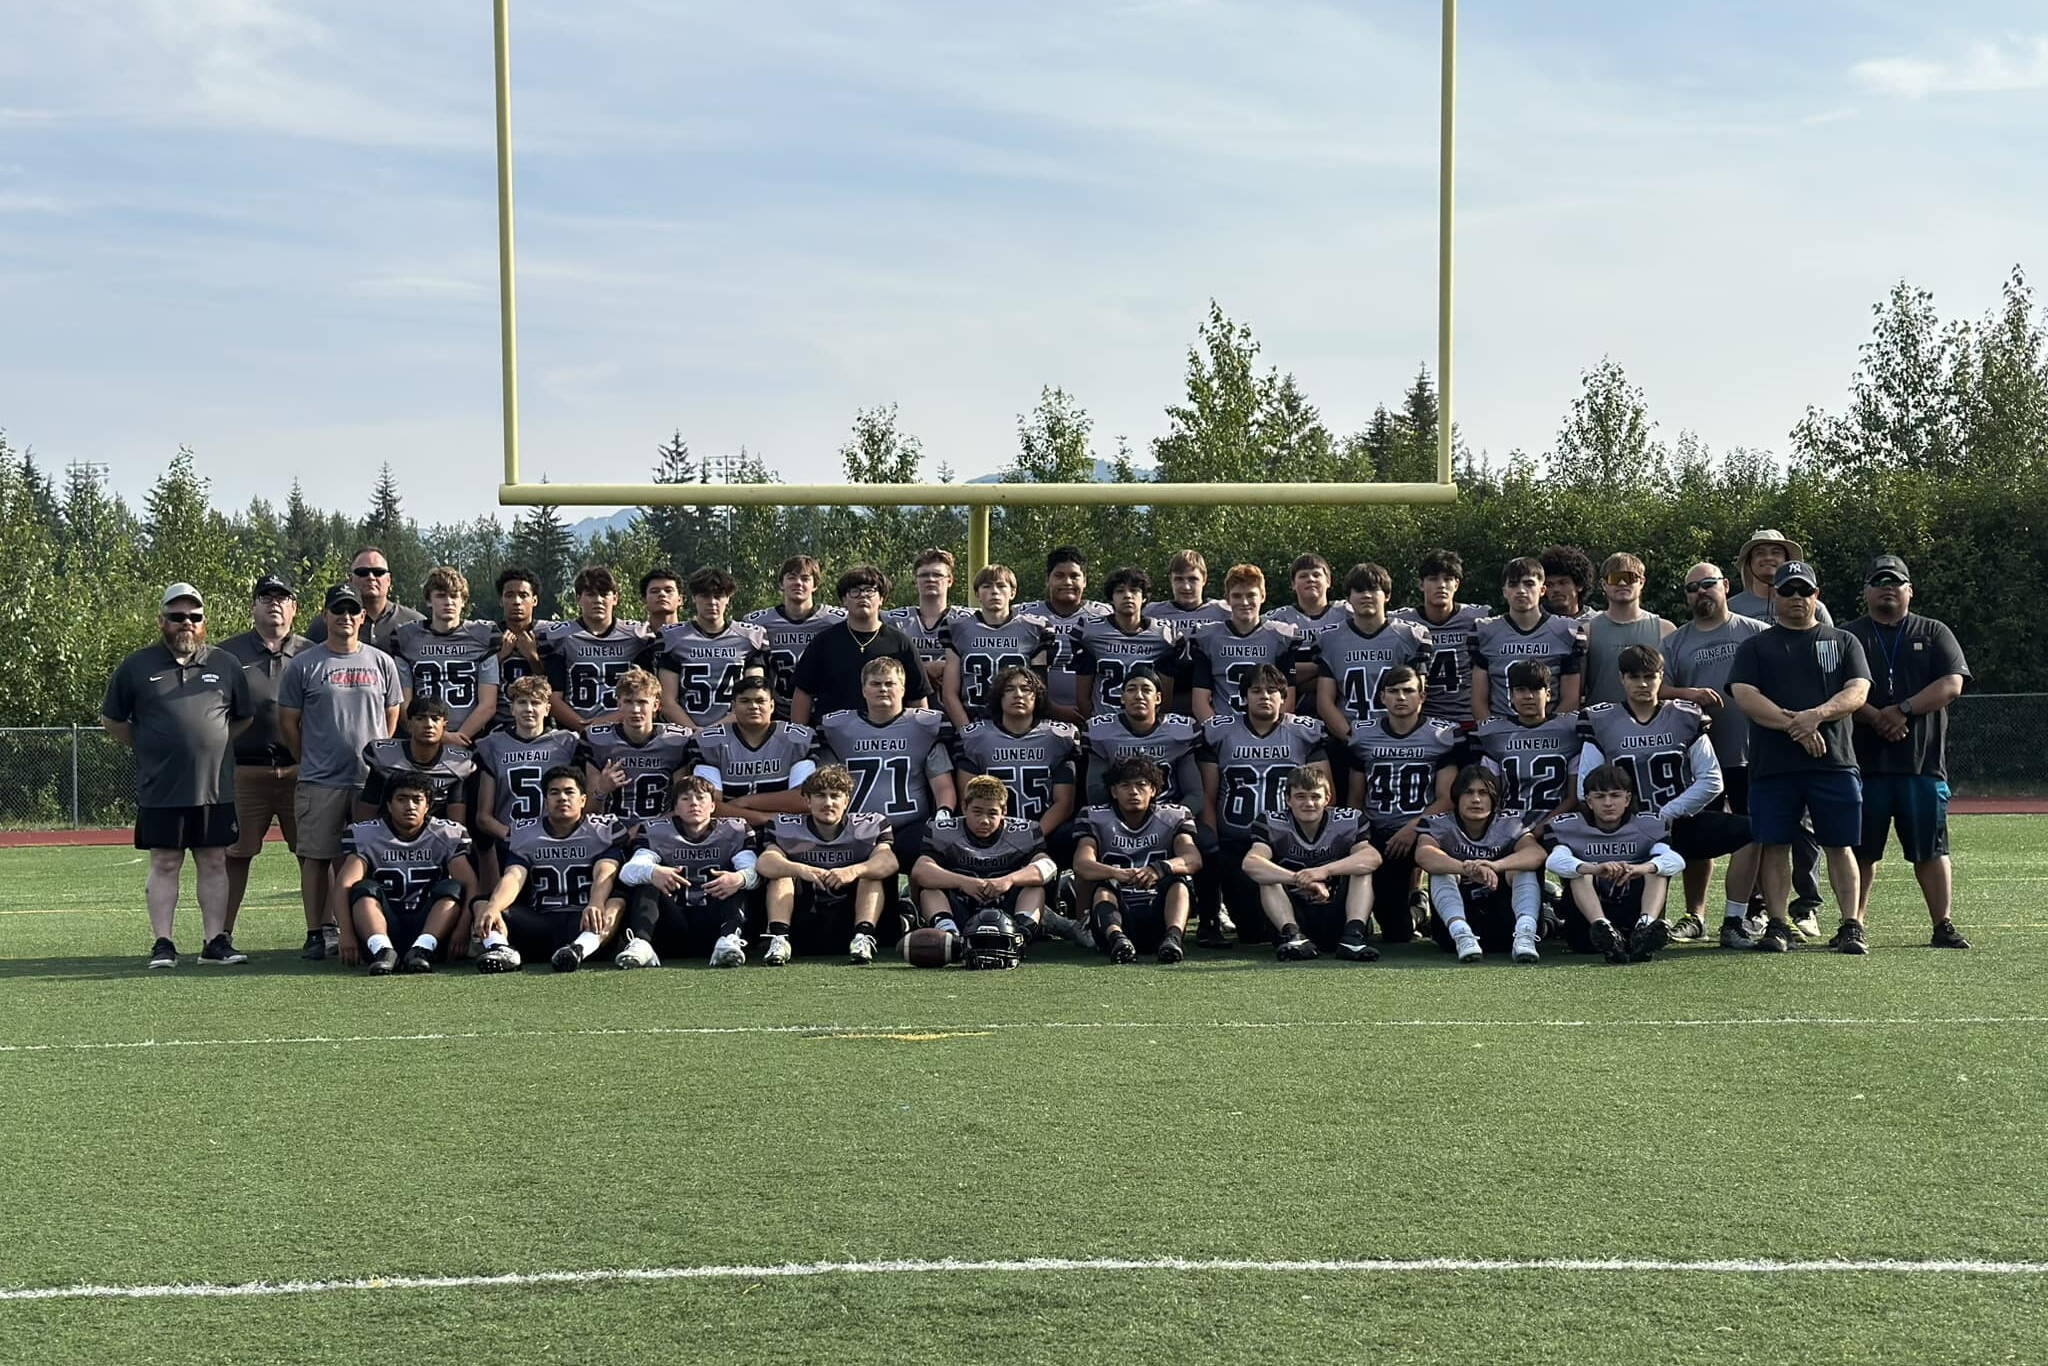 A team photo of the 2023 Juneau Huskies, who kick off their season with a home game against East Anchorage at 3 p.m. Saturday. (Courtesy of Juneau Huskies Football)